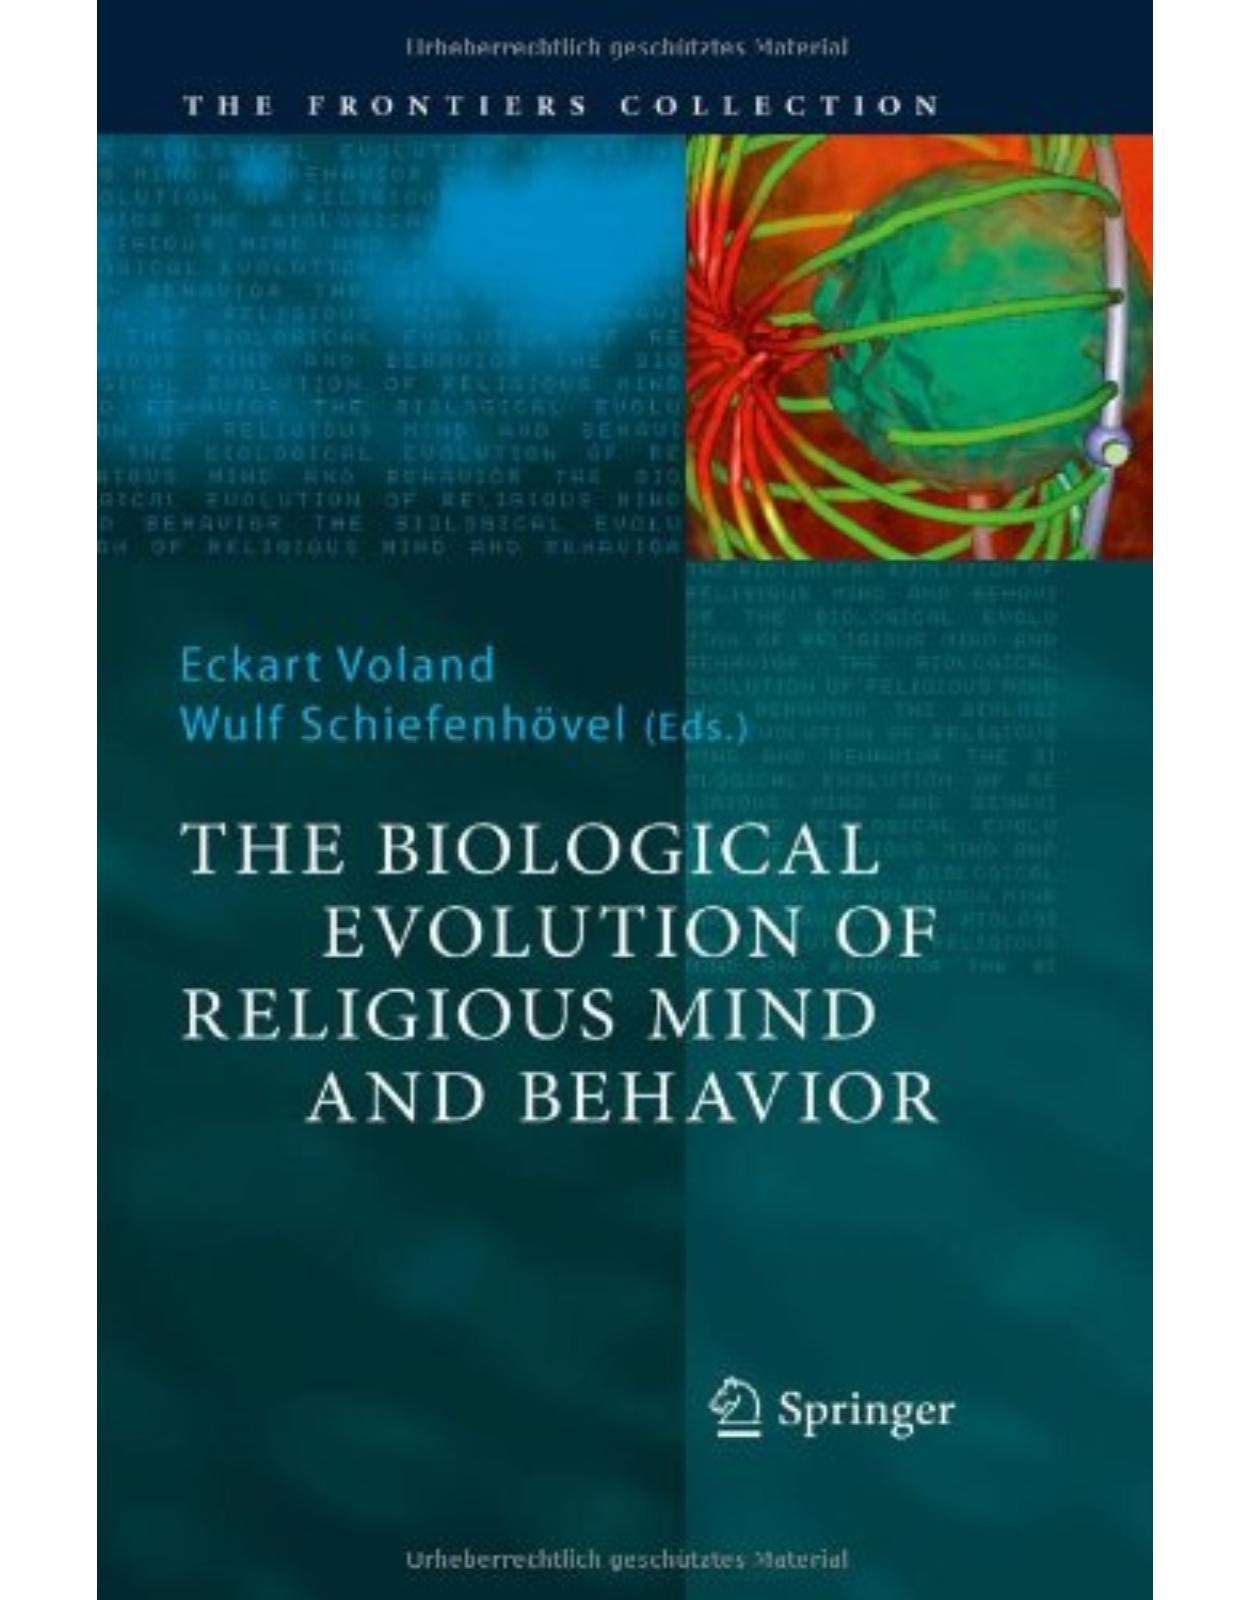 The Biological Evolution of Religious Mind and Behavior (The Frontiers Collection) 